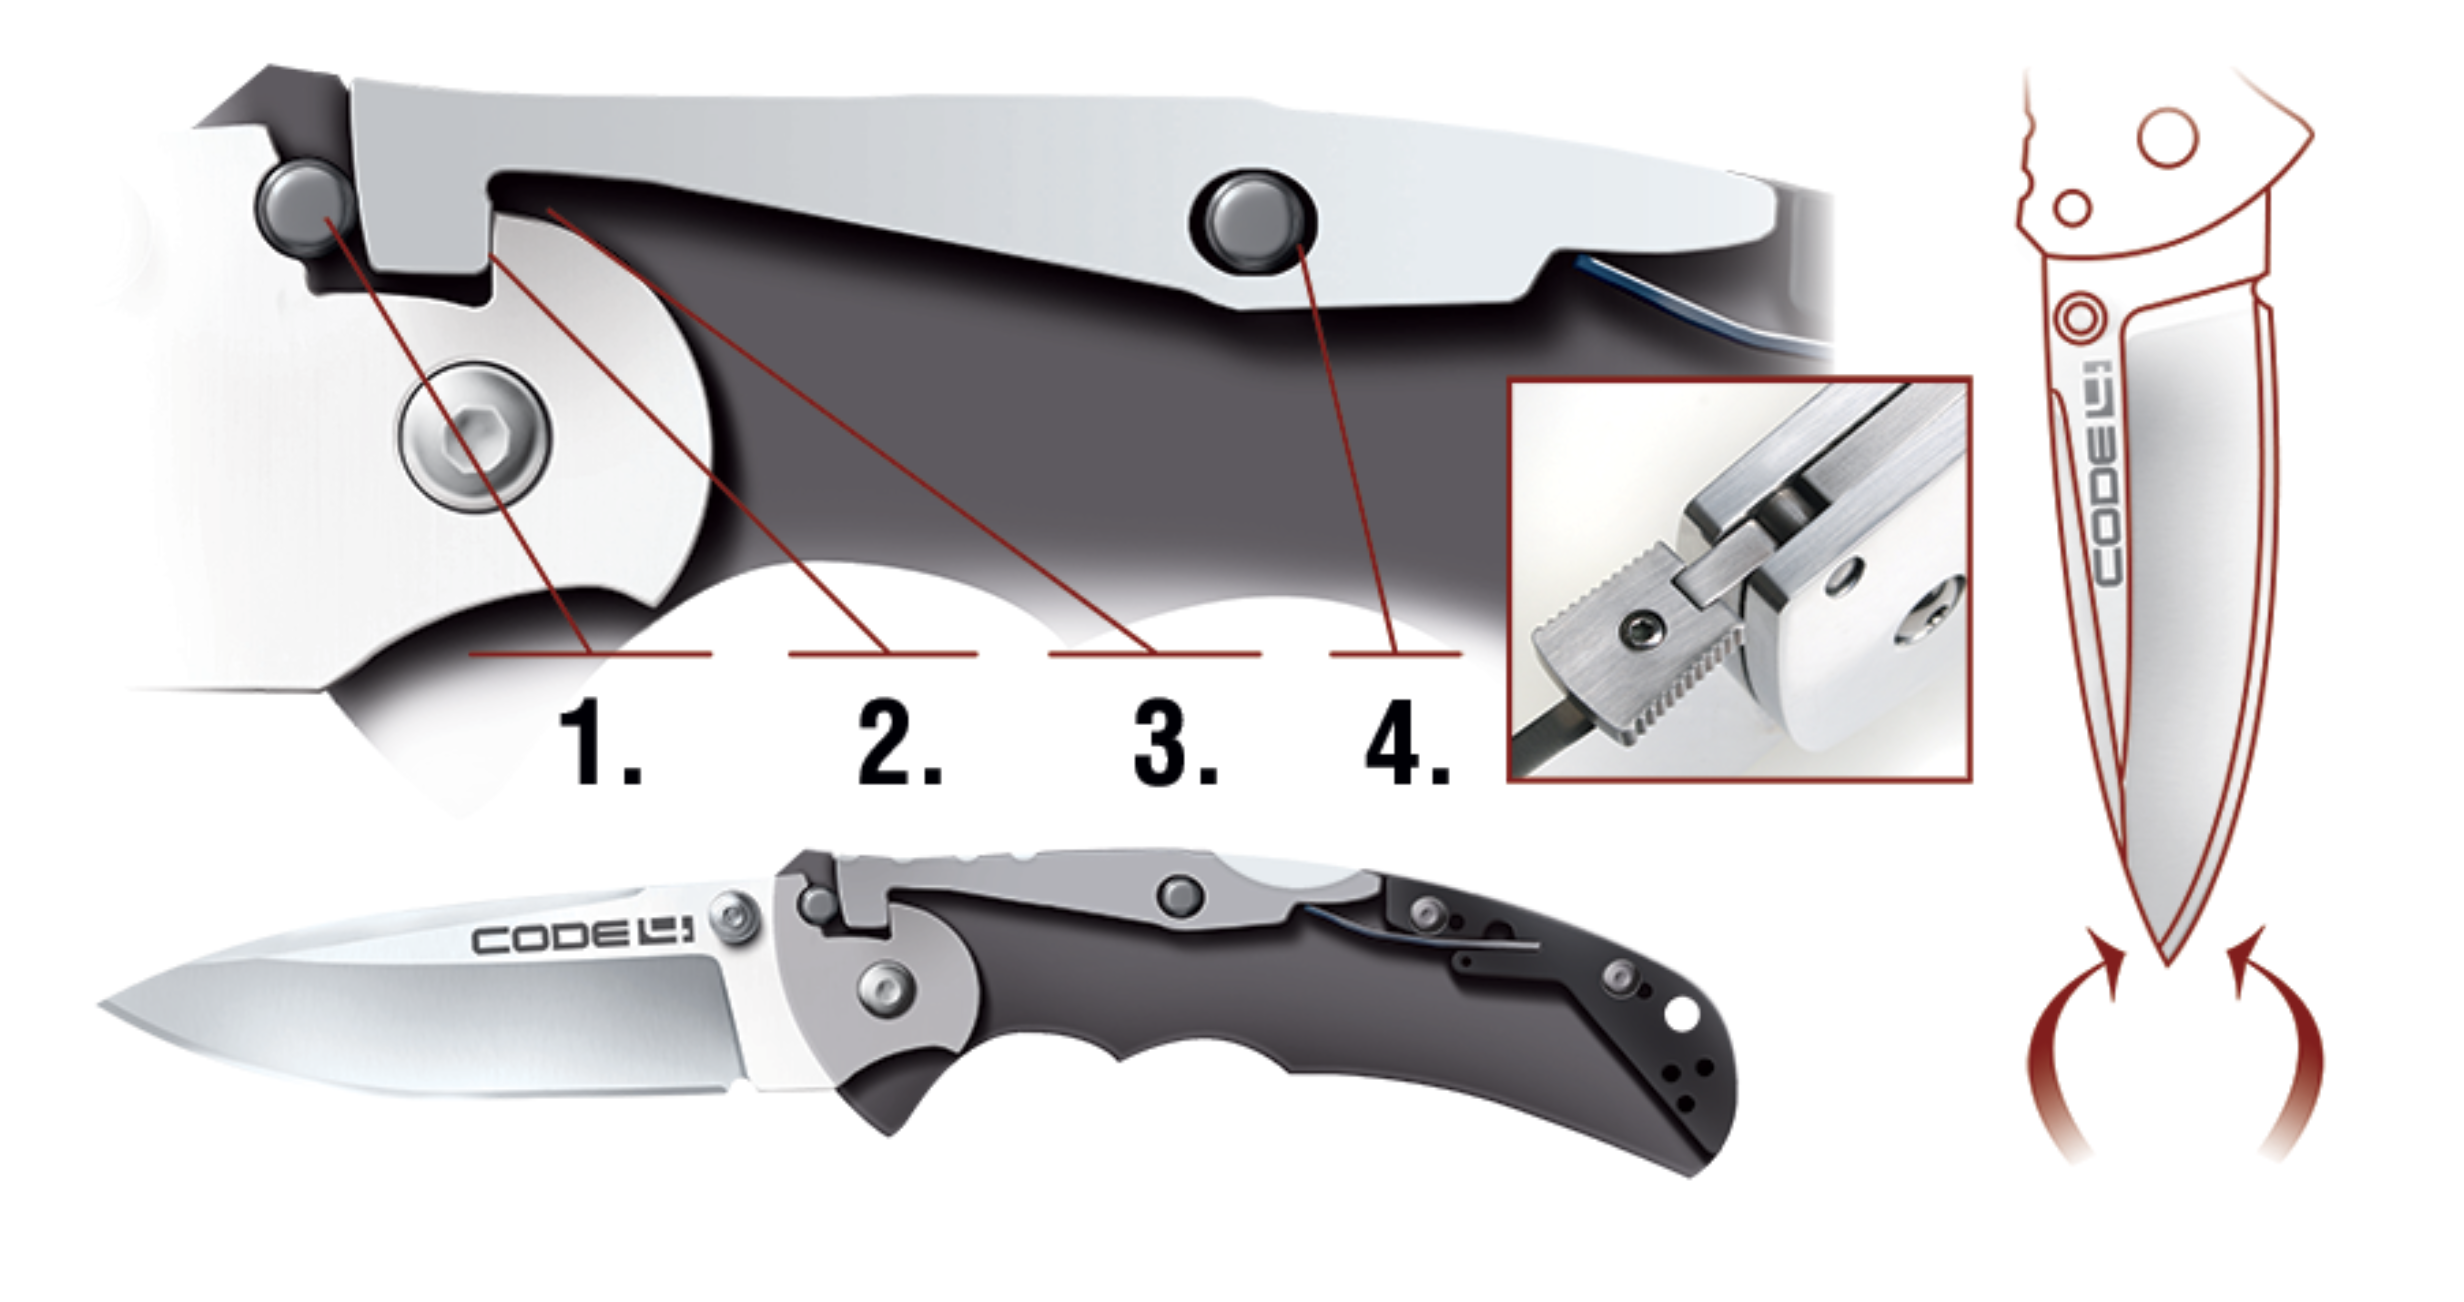 Tri-ad Lock Patented Knife Locking Technology | Cold Steel